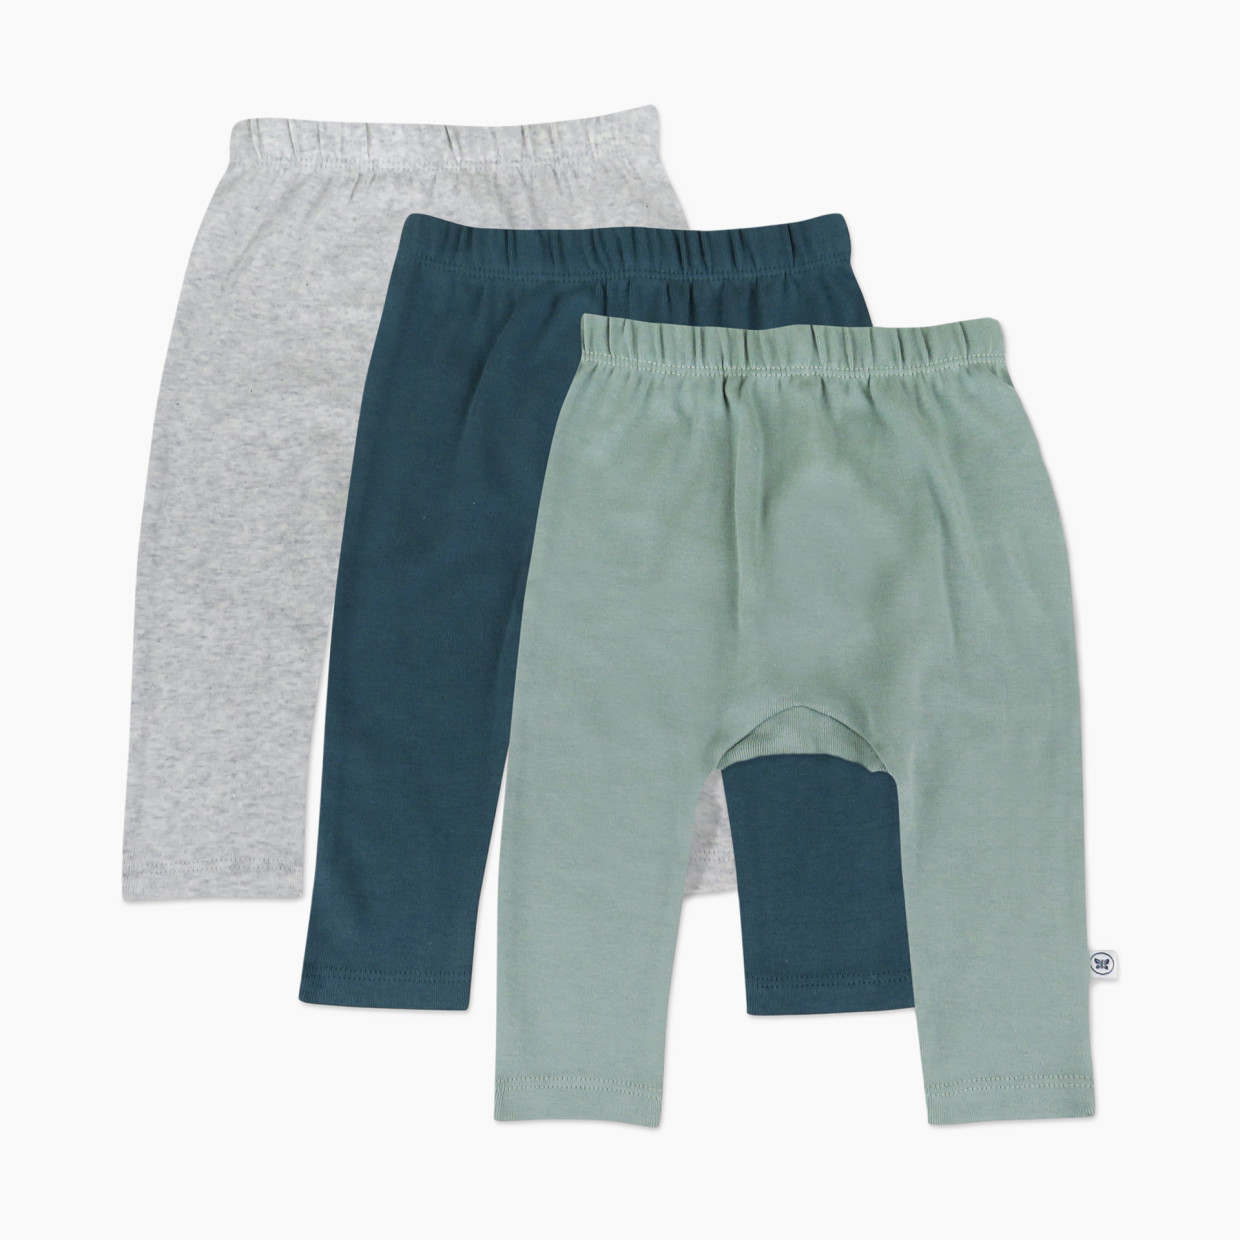 Honest Baby Clothing 3-Pack Organic Cotton Cuff-less Harem Pants - Morning Mountains, 3-6 M.